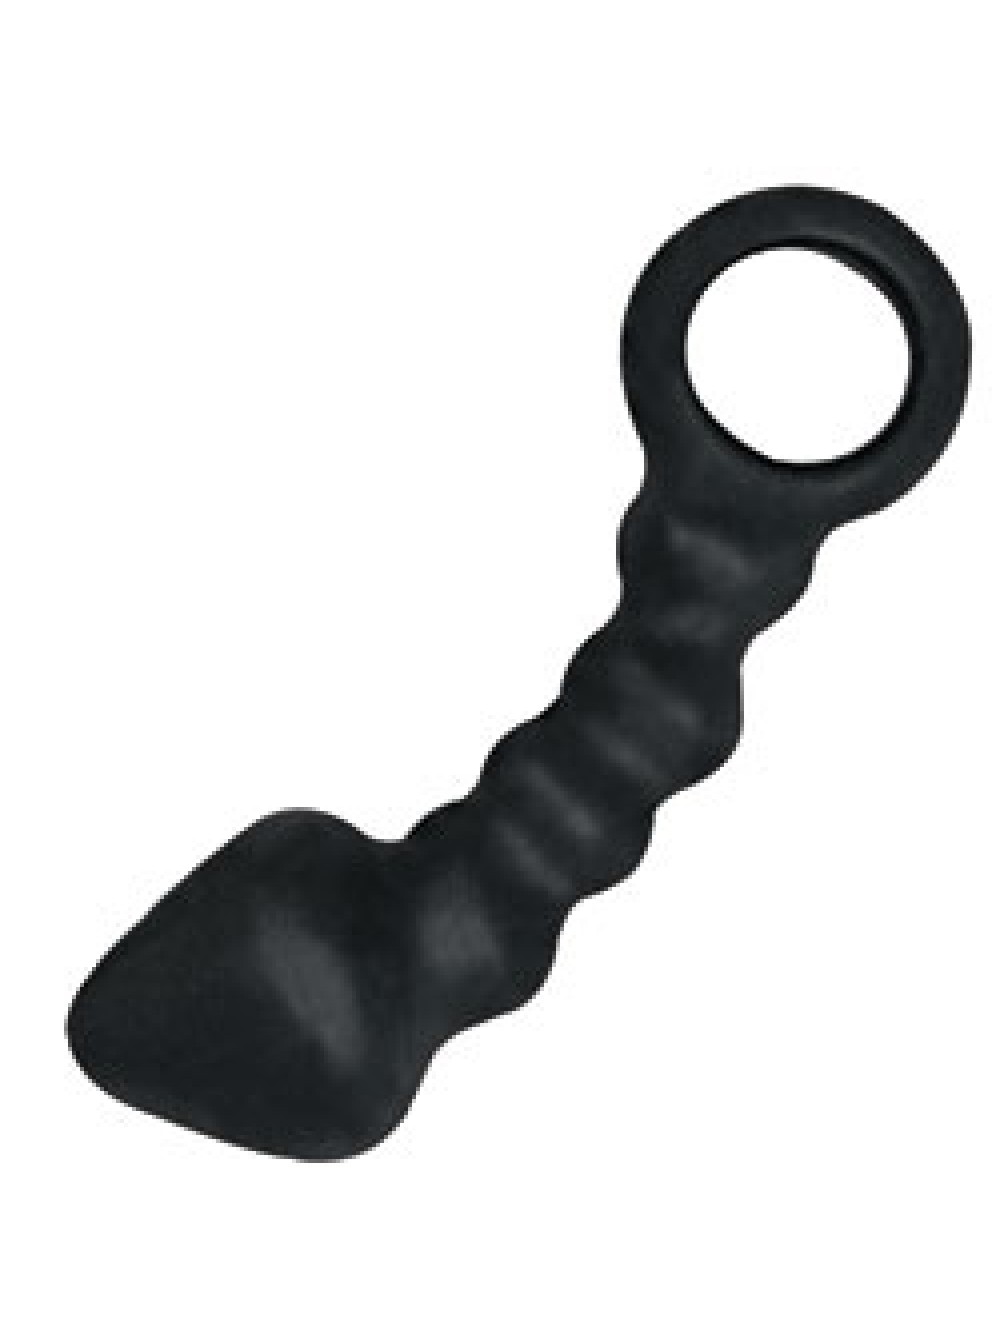 Ram Anal Trainer Silicone Anal Beads 3 782631251227